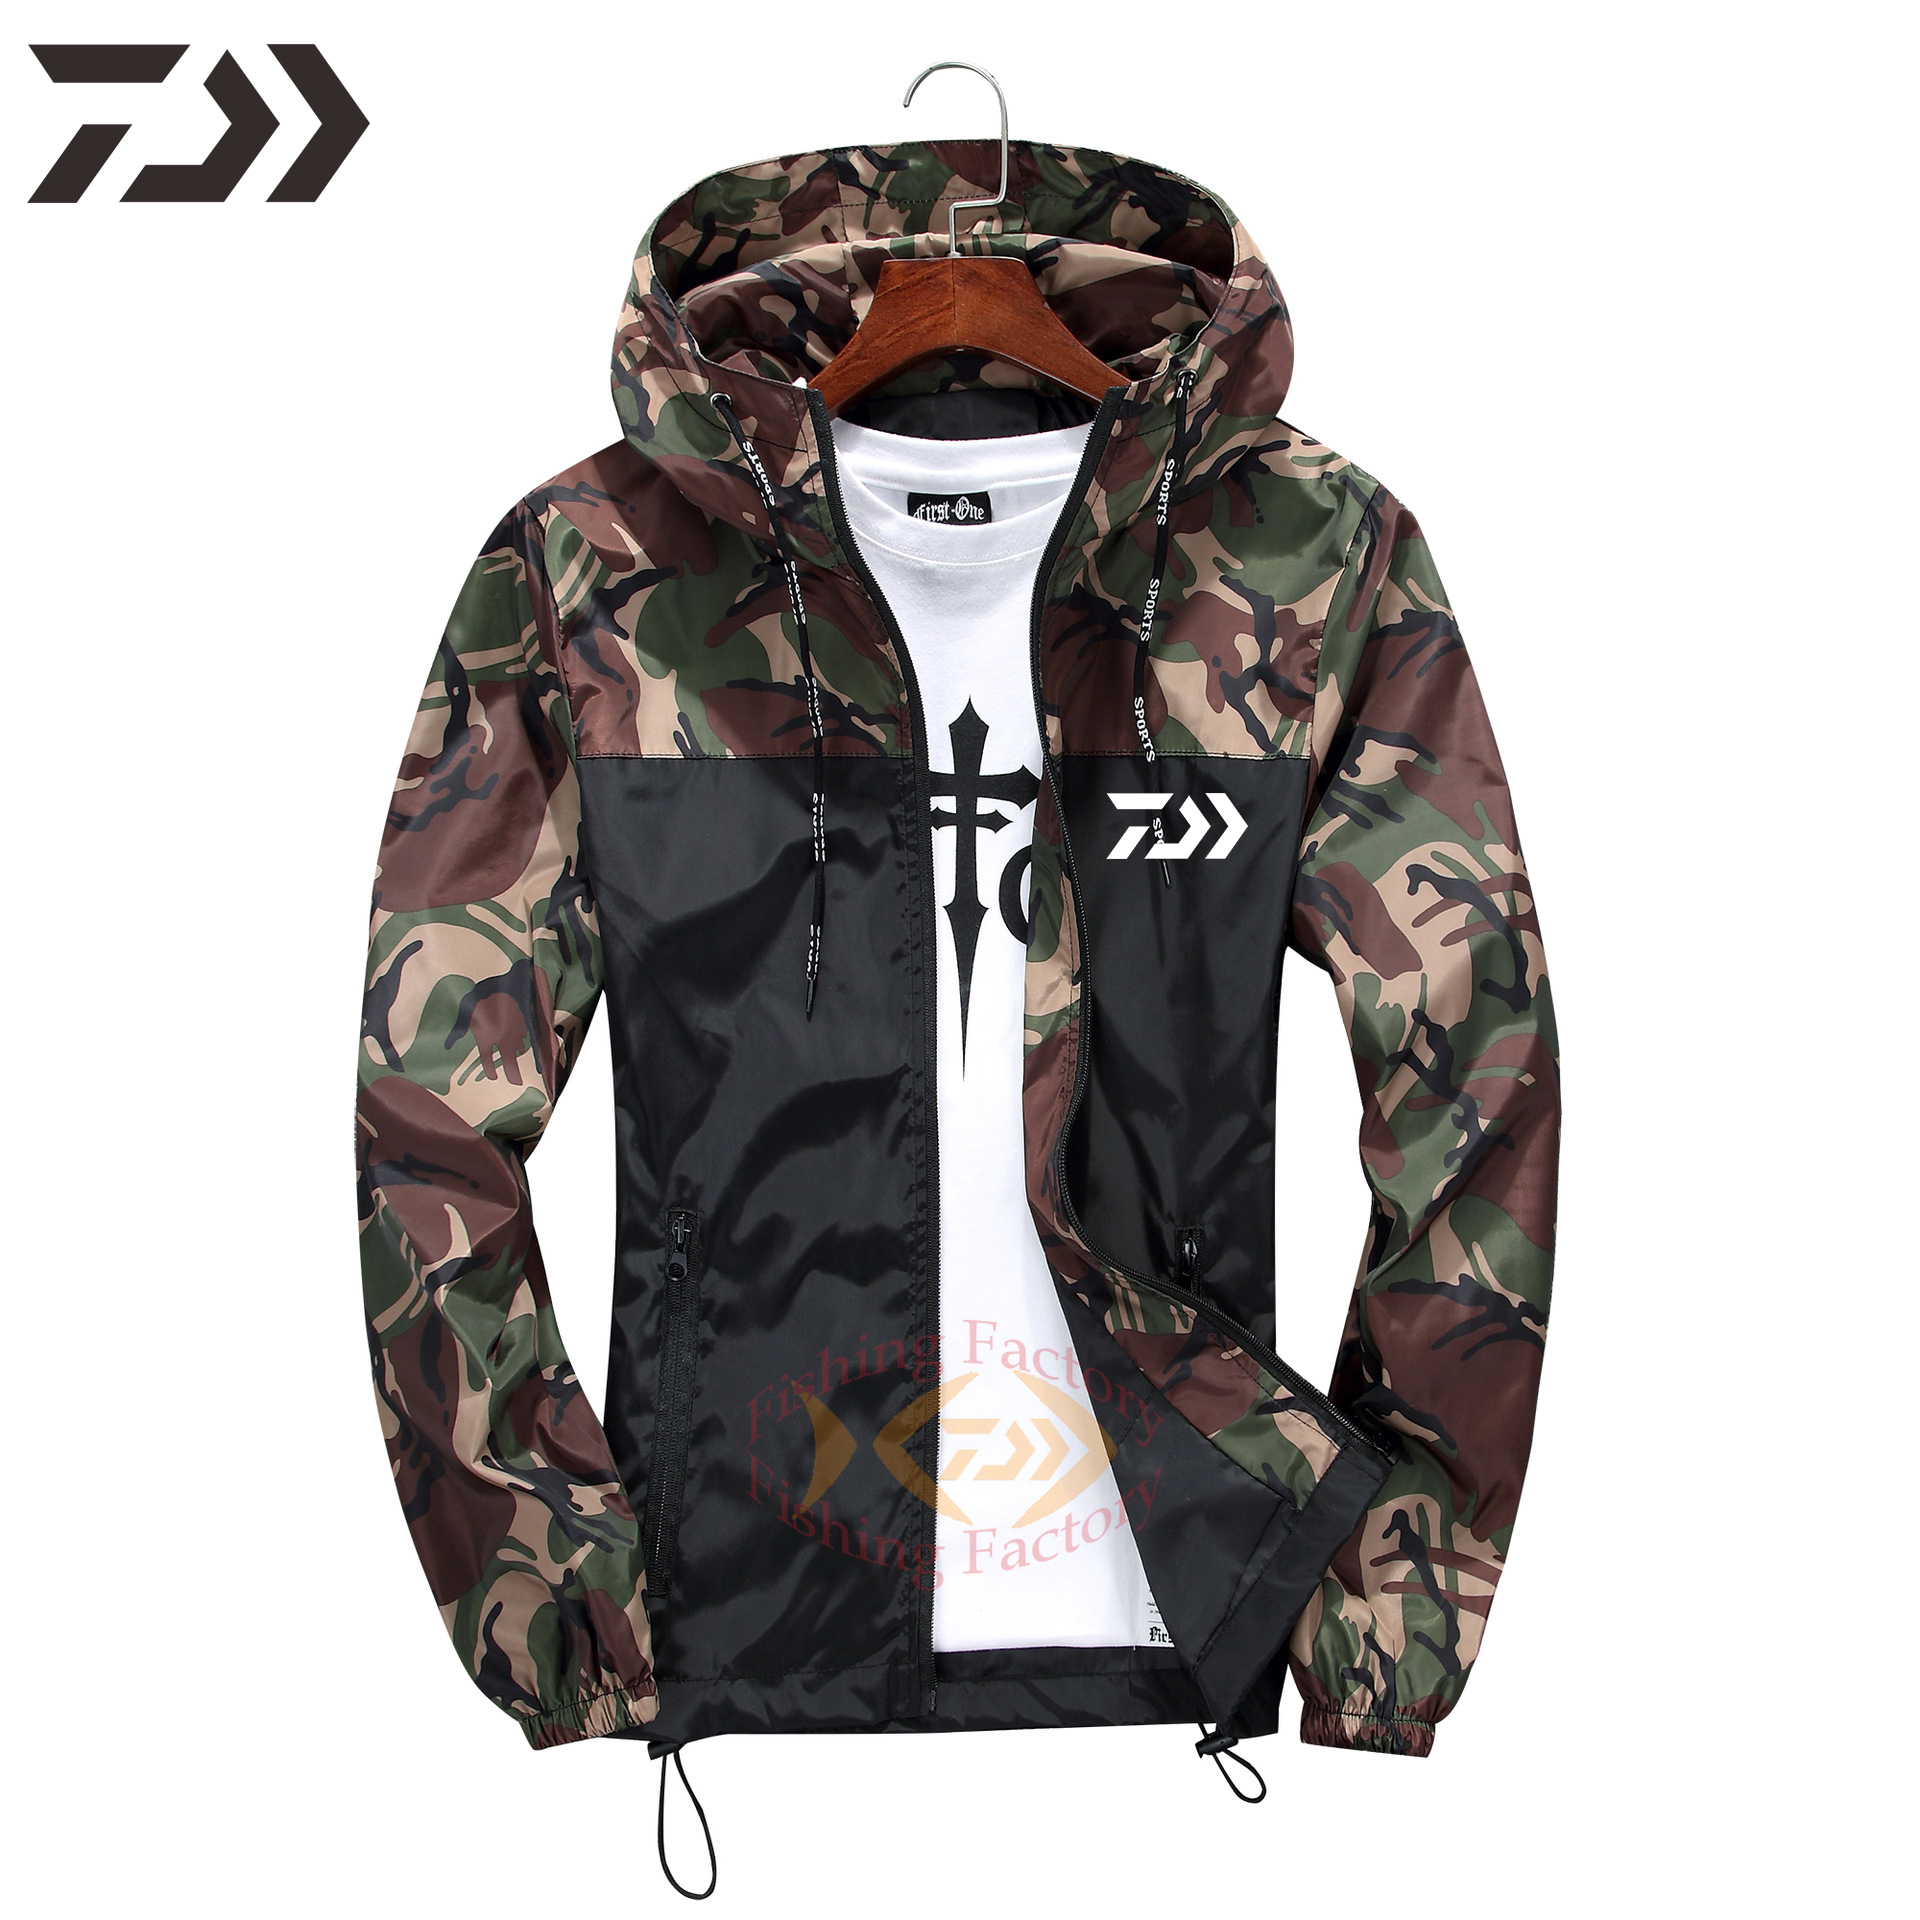 Daiwa Fishing Shirts Ultrathin Hooded Casual Outdoor Sport Wear Quick Dry Fishing Jackets Camouflage Sport Fishing Clothes